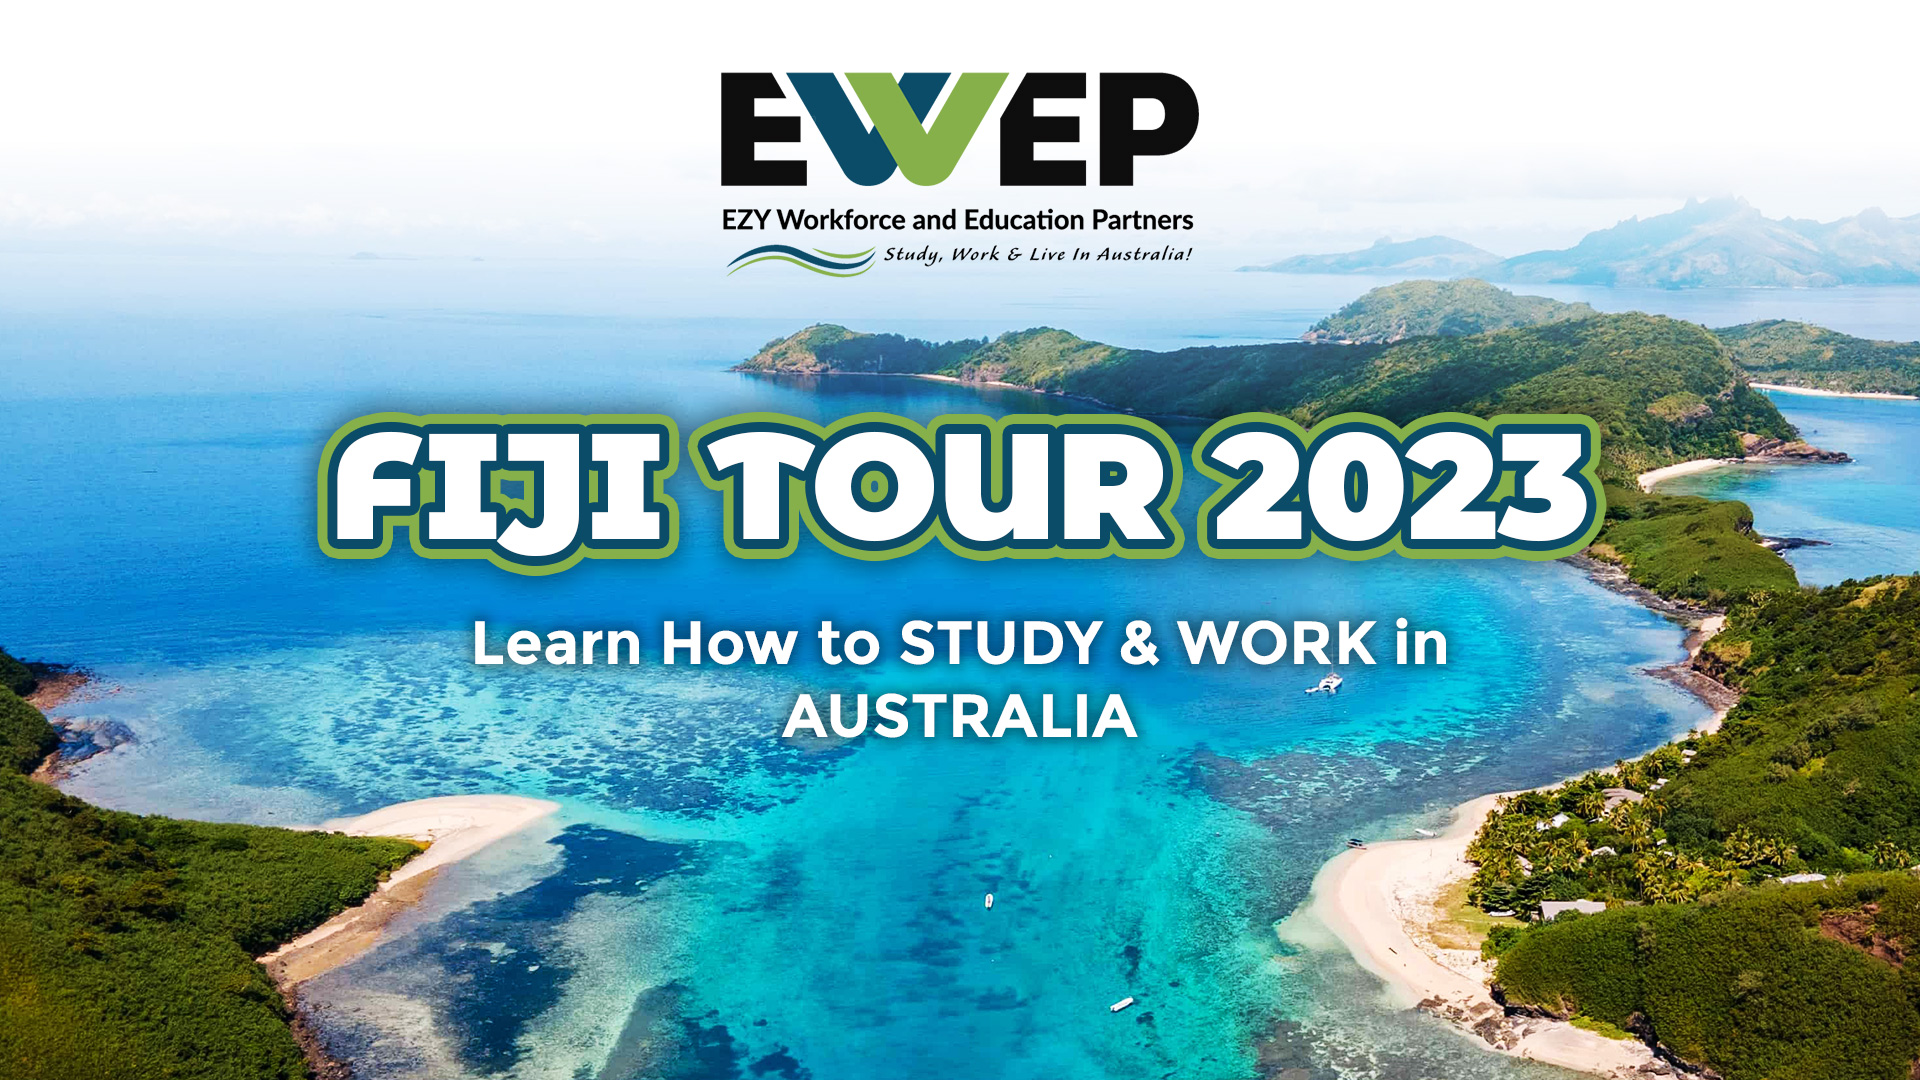 EZY Workforce and Education Partners in Fiji